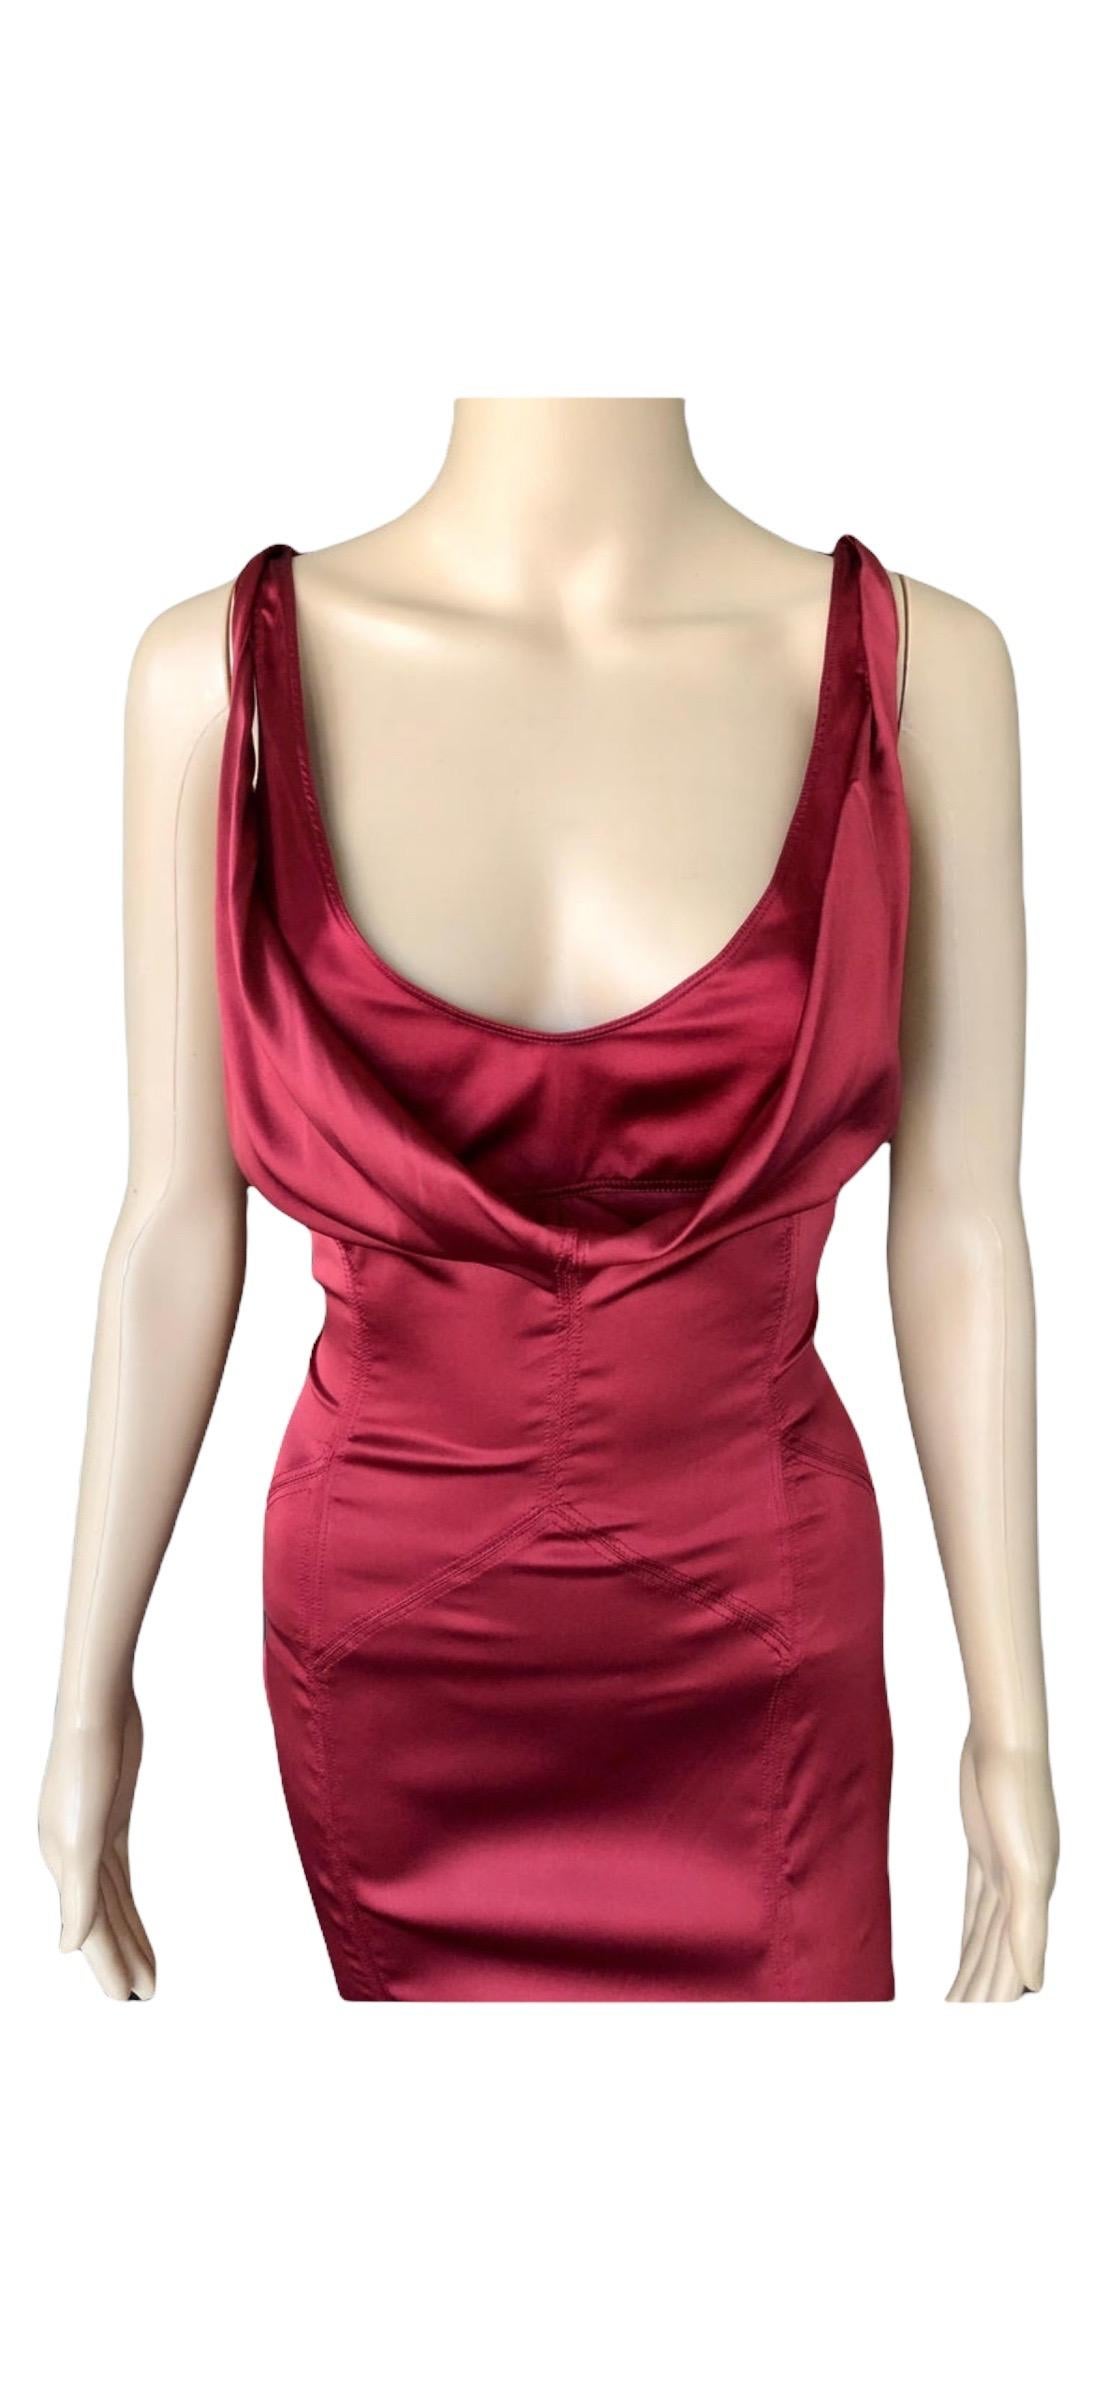 Tom Ford for Gucci F/W 2003 Runway Cutout Bustier Silk Dress For Sale 7